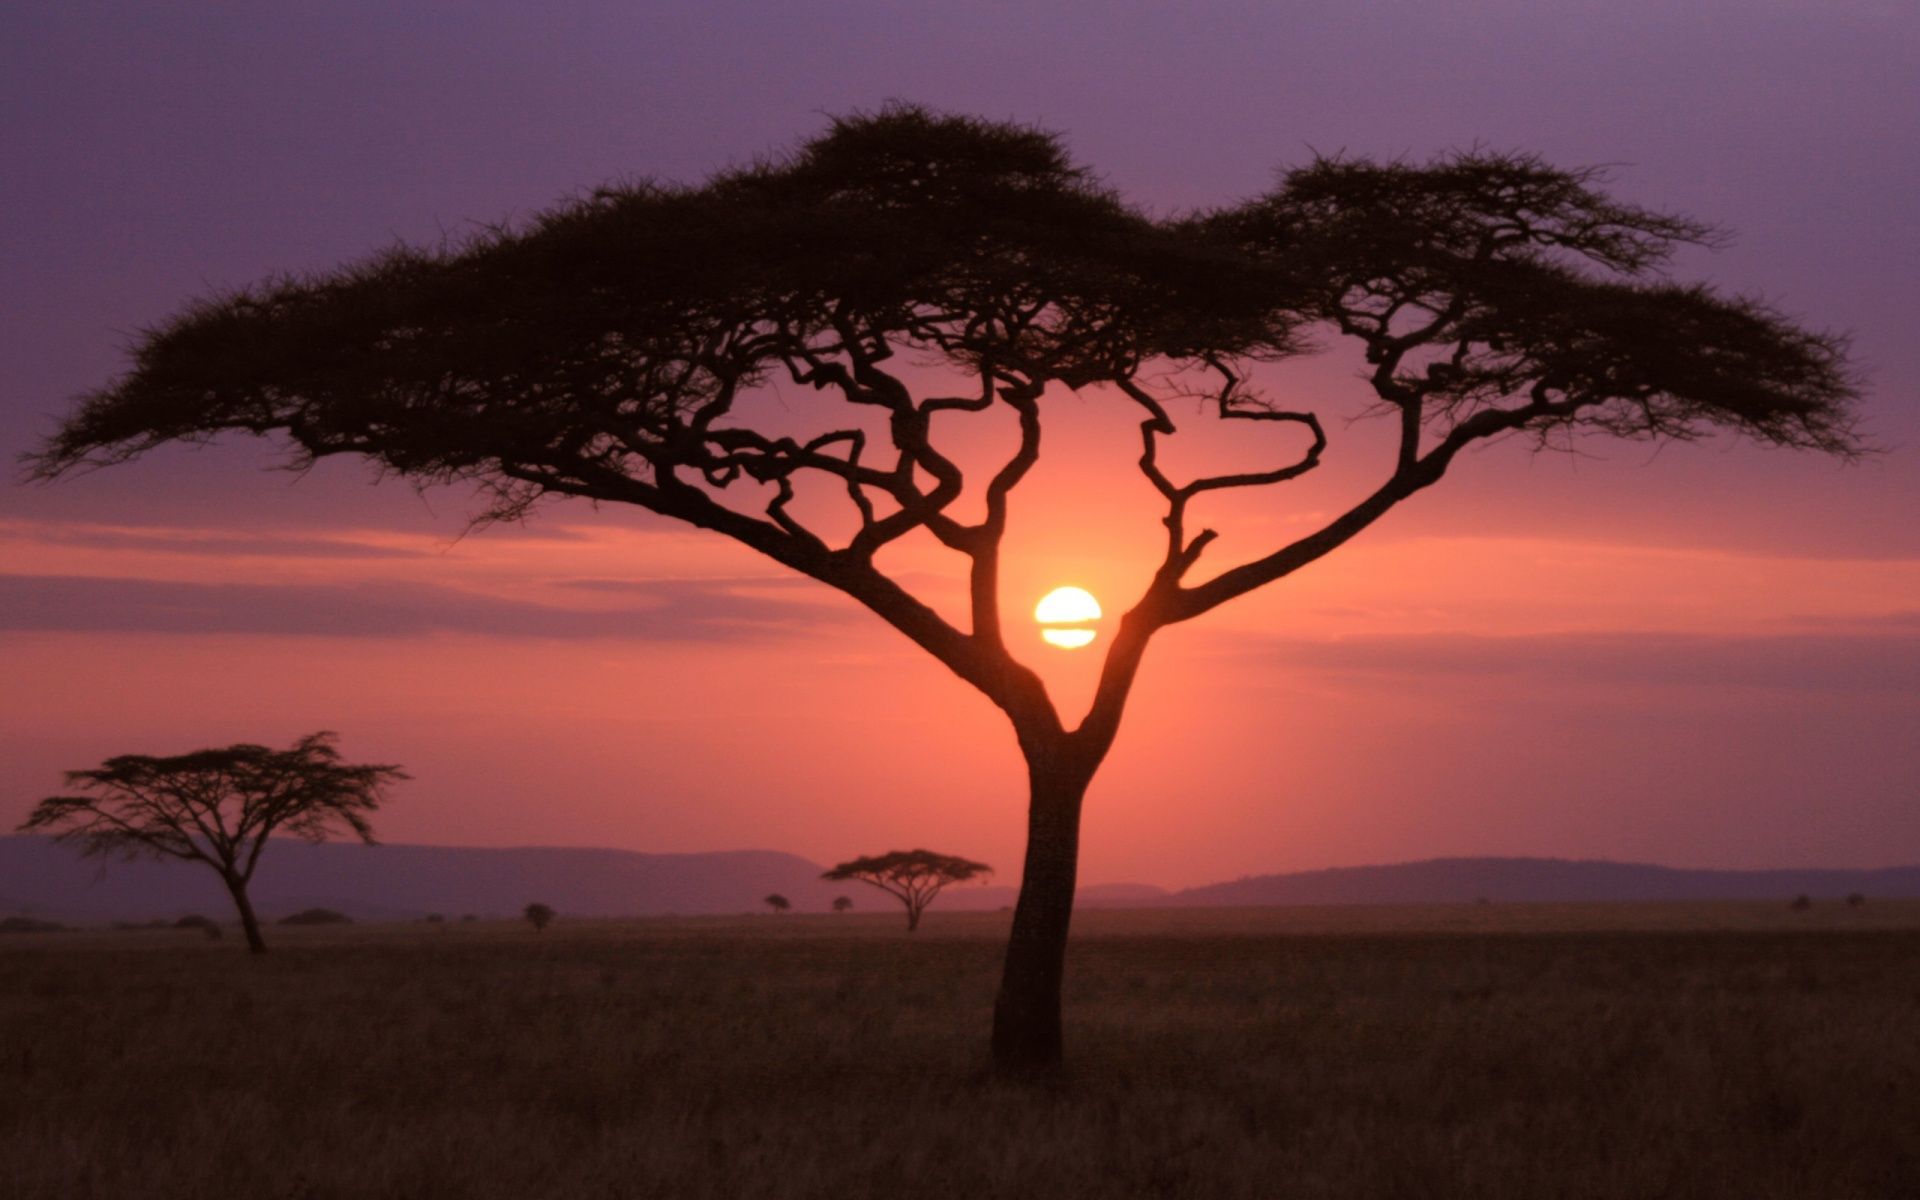 African Sunset Wallpaper in jpg format for free download